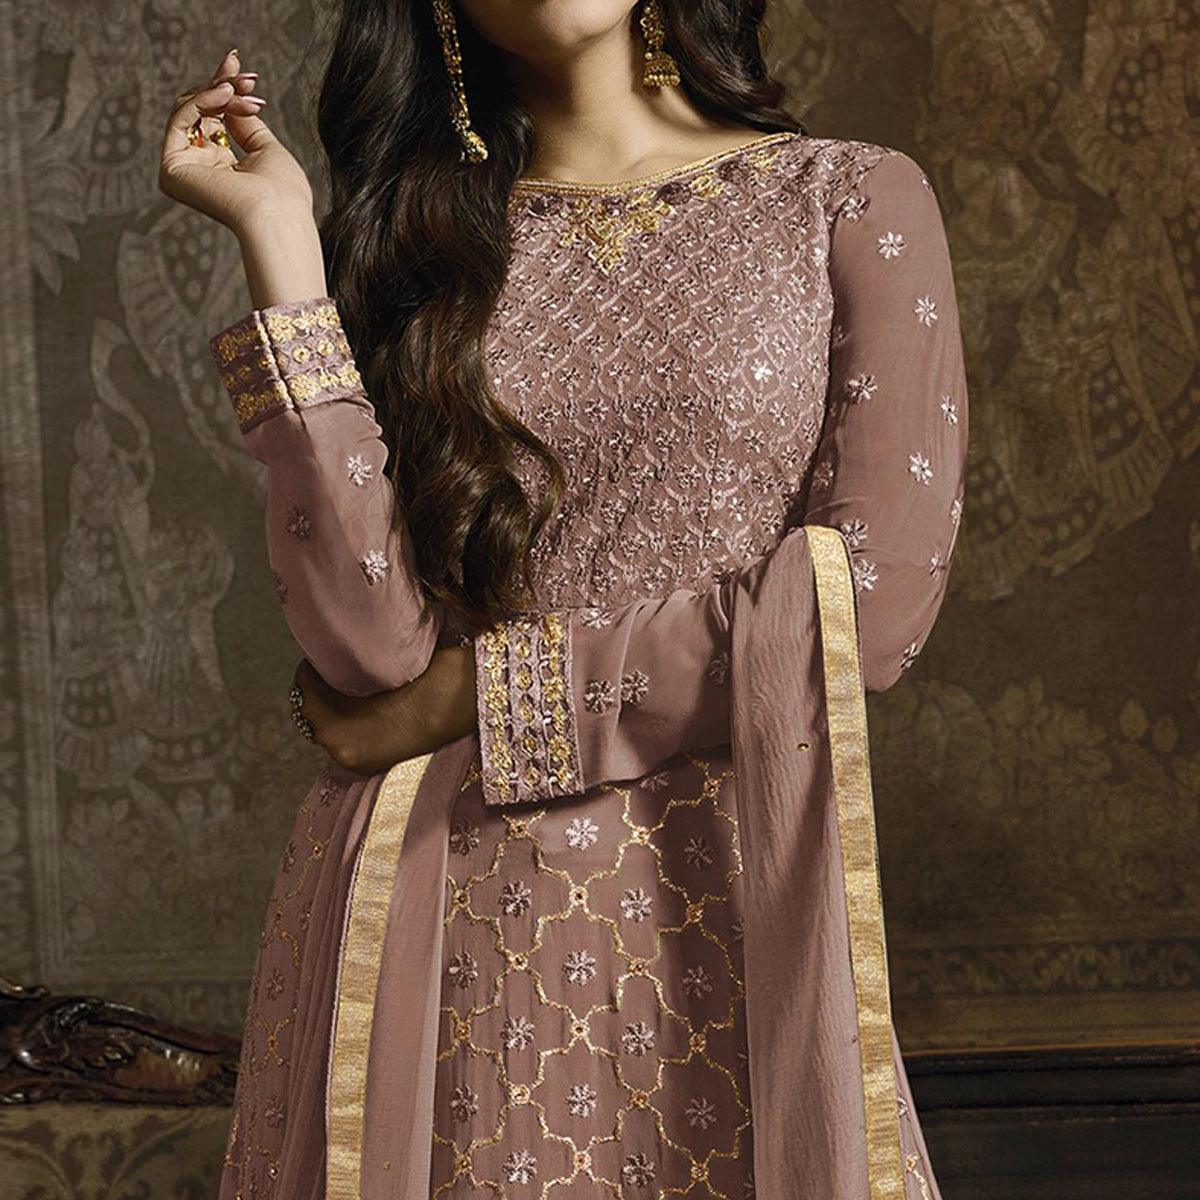 Ravishing Mauve Colored Partywear Embroidered Faux Georgette Lehenga Suit - Peachmode